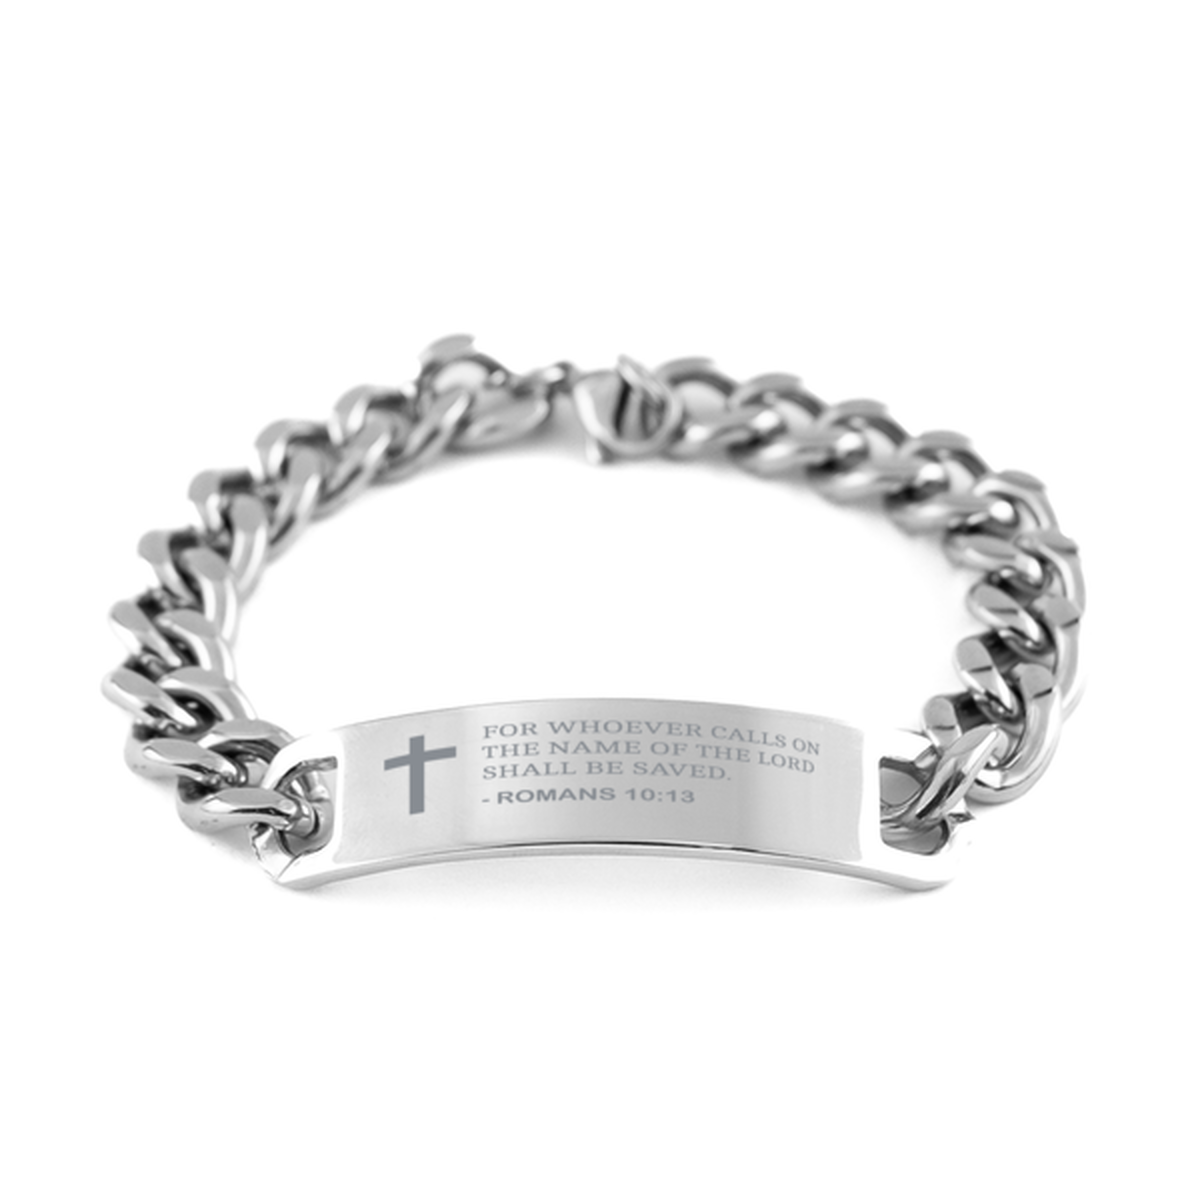 Bible Verse Chain Stainless Steel Bracelet, Romans 10:13 For Whoever Calls On The Name Of The Lord Shall, Inspirational Christian Gifts For Men Women